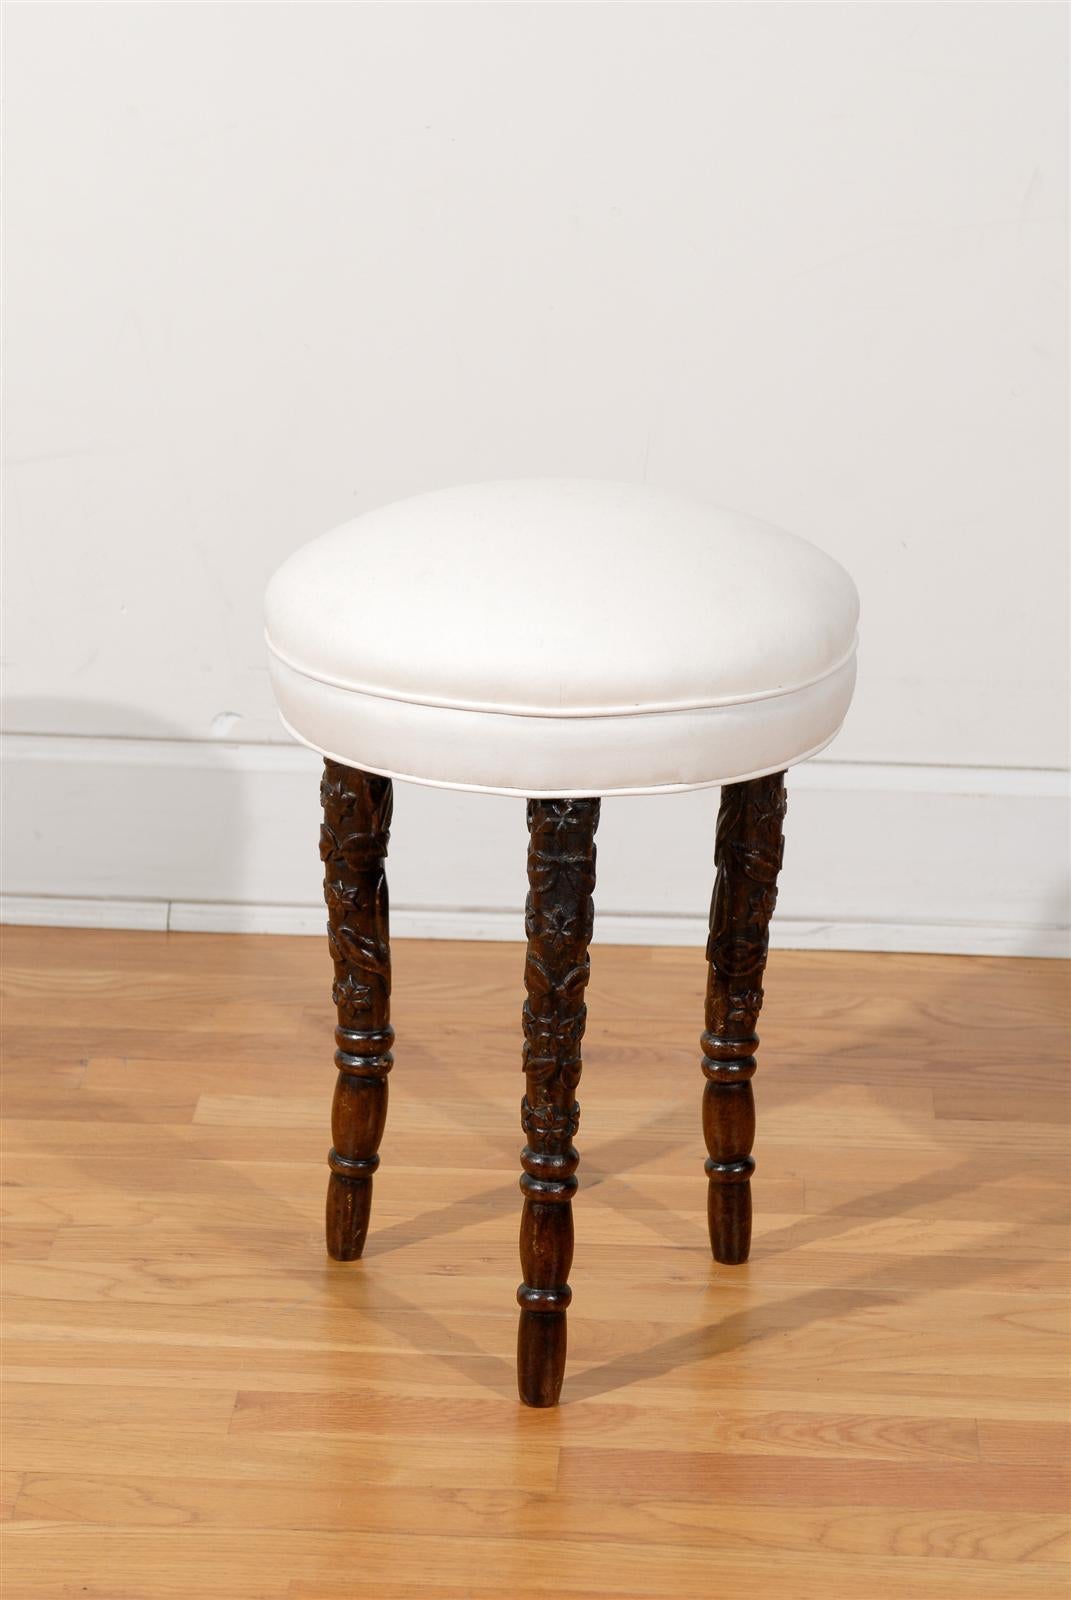 A German Black Forest carved wooden stool from the late 19th century with newly upholstered seat. This Black Forest stool features a simple single welt muslin covered round seat raised on three beautifully carved dark wooden legs. Each leg is